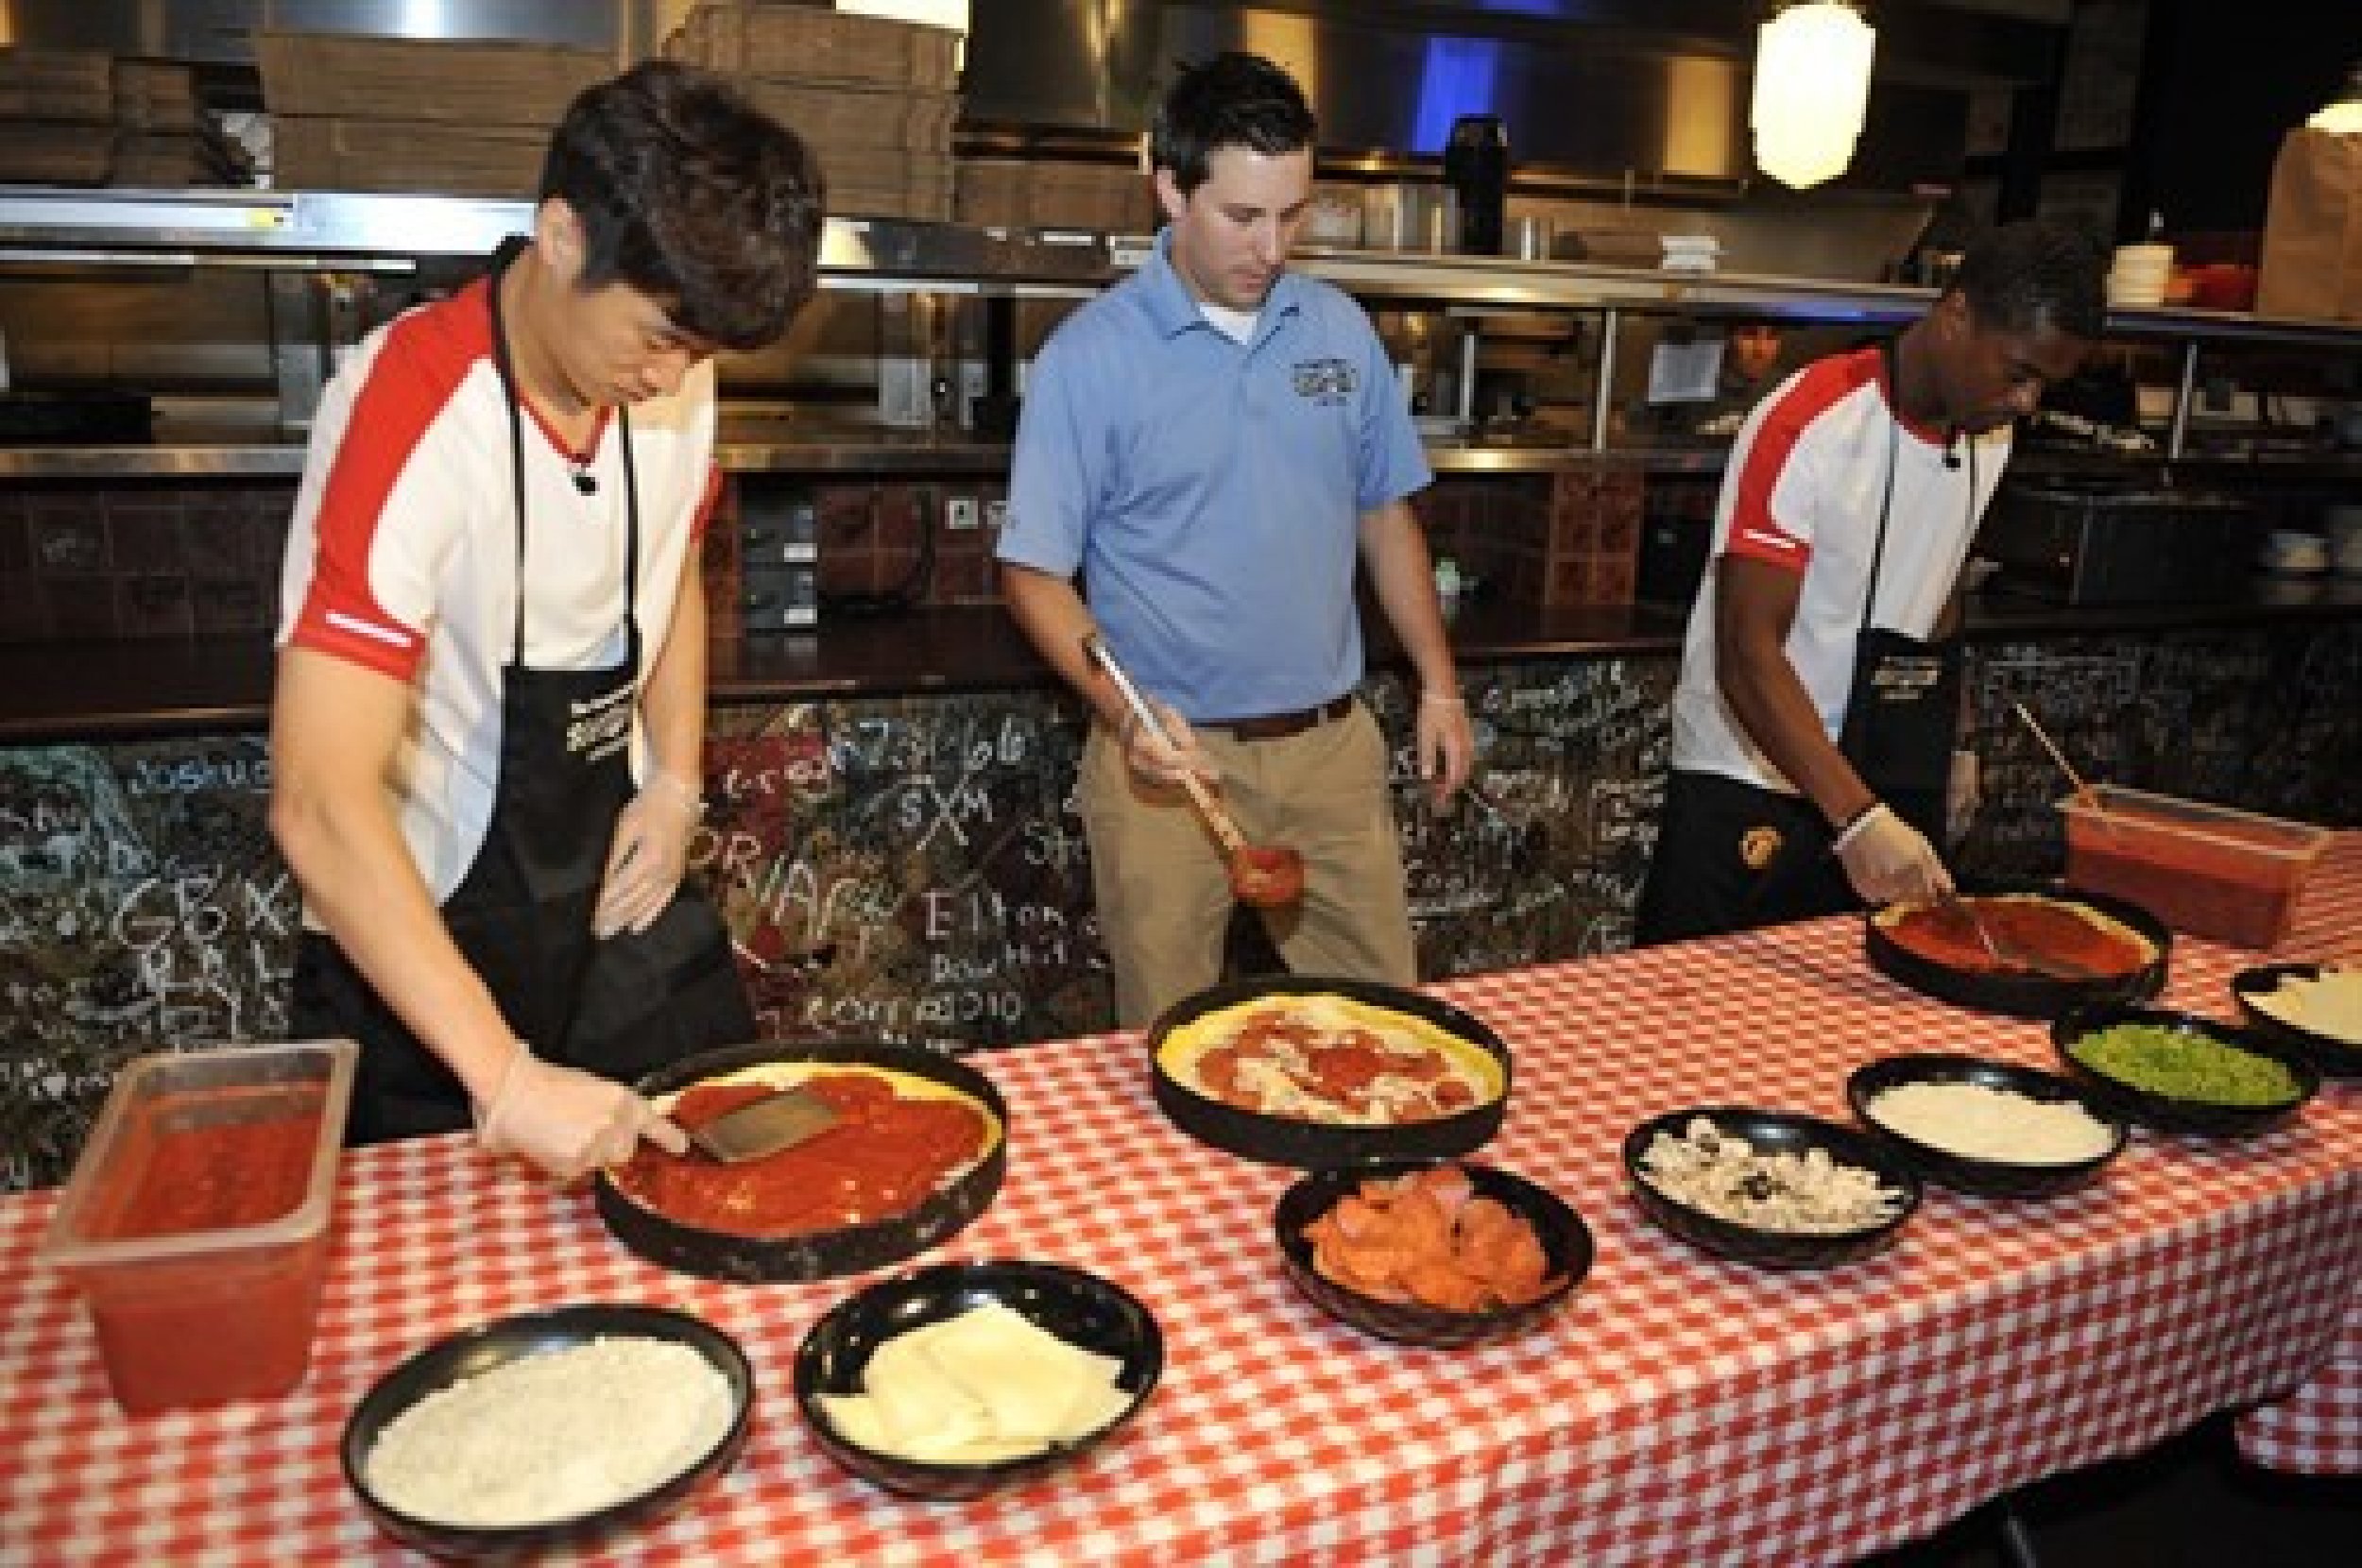 Patrice Evra and Park Ji-Sung have a go at making pizzas at Ginos East in Illinois.